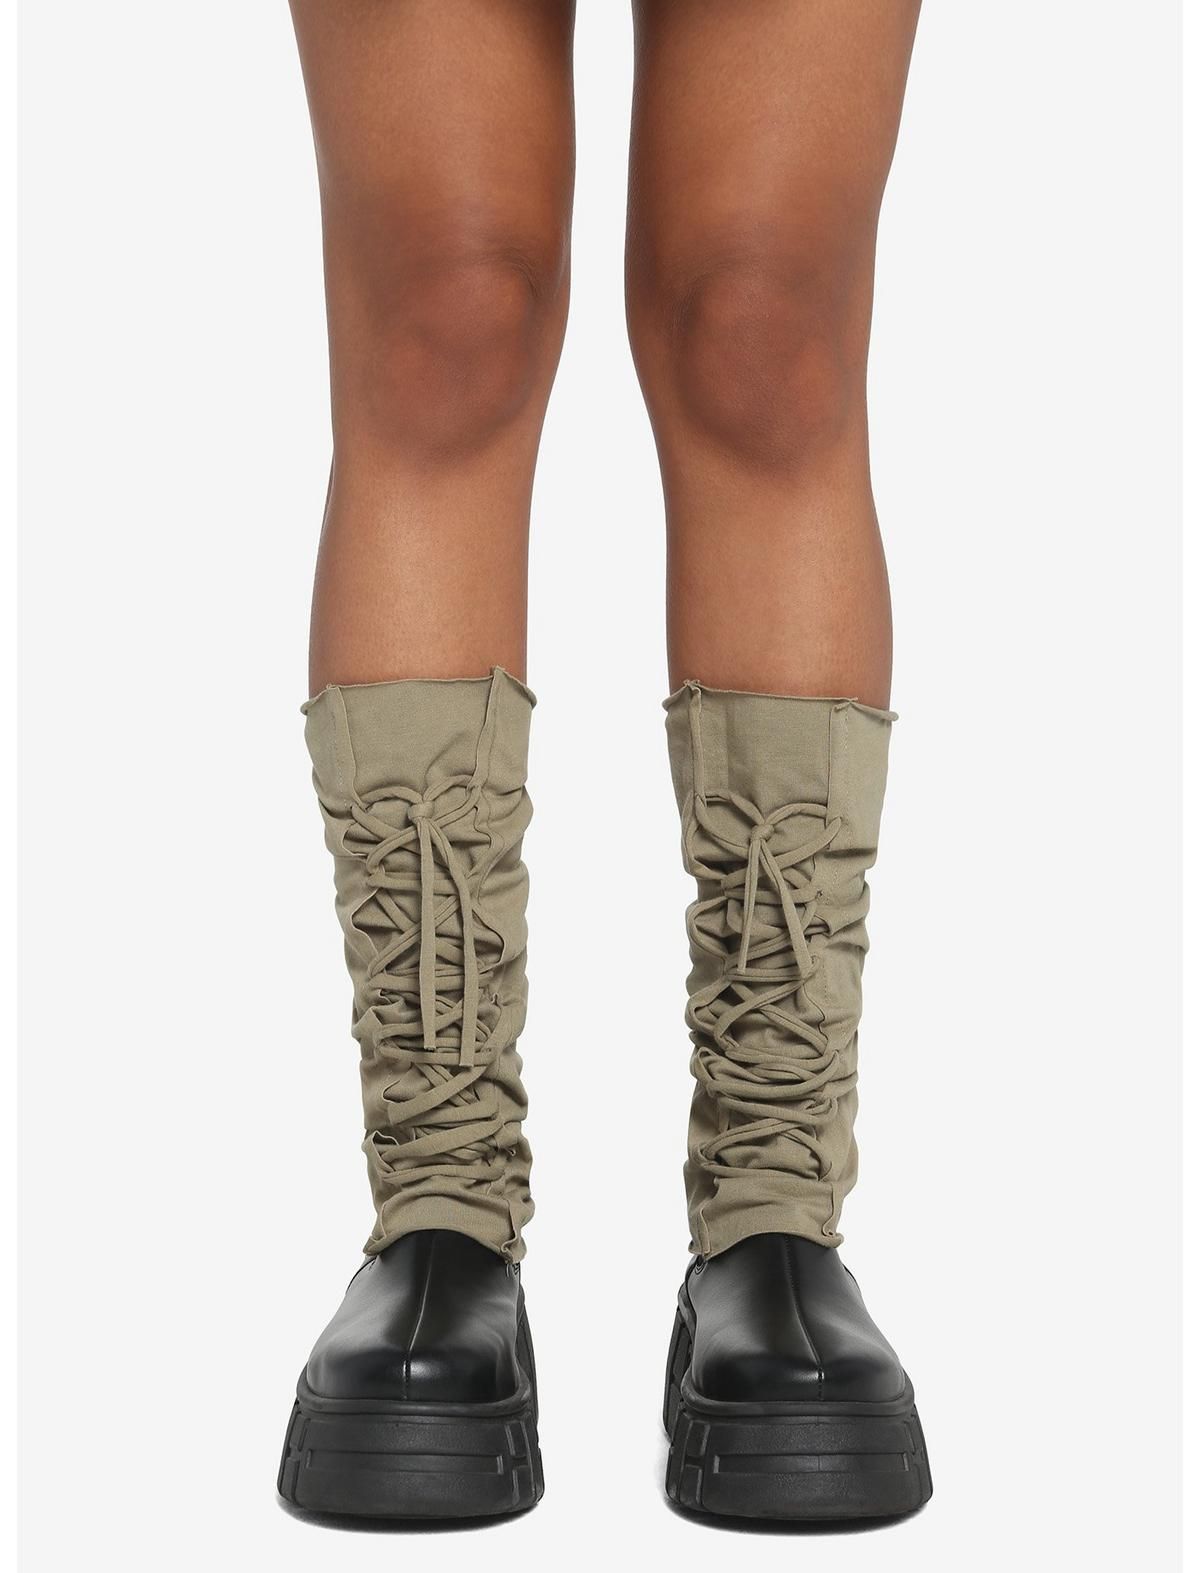 Olive Green Lace-Up Leg Warmers | Hot Topic | Hot Topic